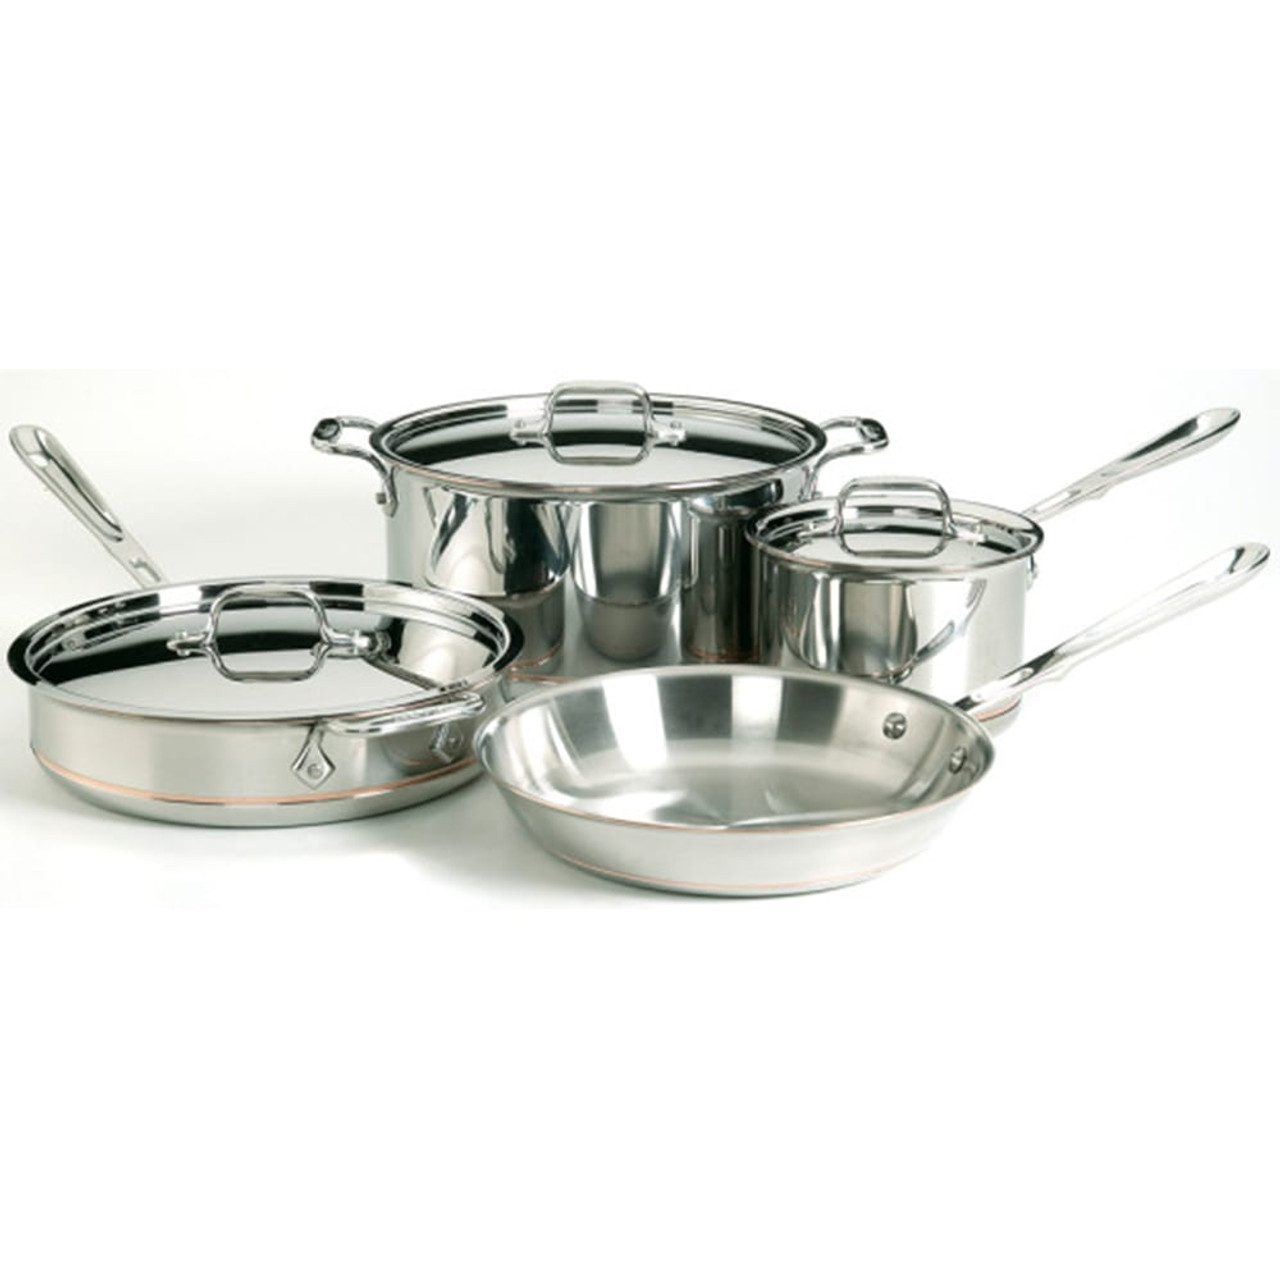 ALL-CLAD Stainless 3-Qt Saute Pan - Signature Art Ware